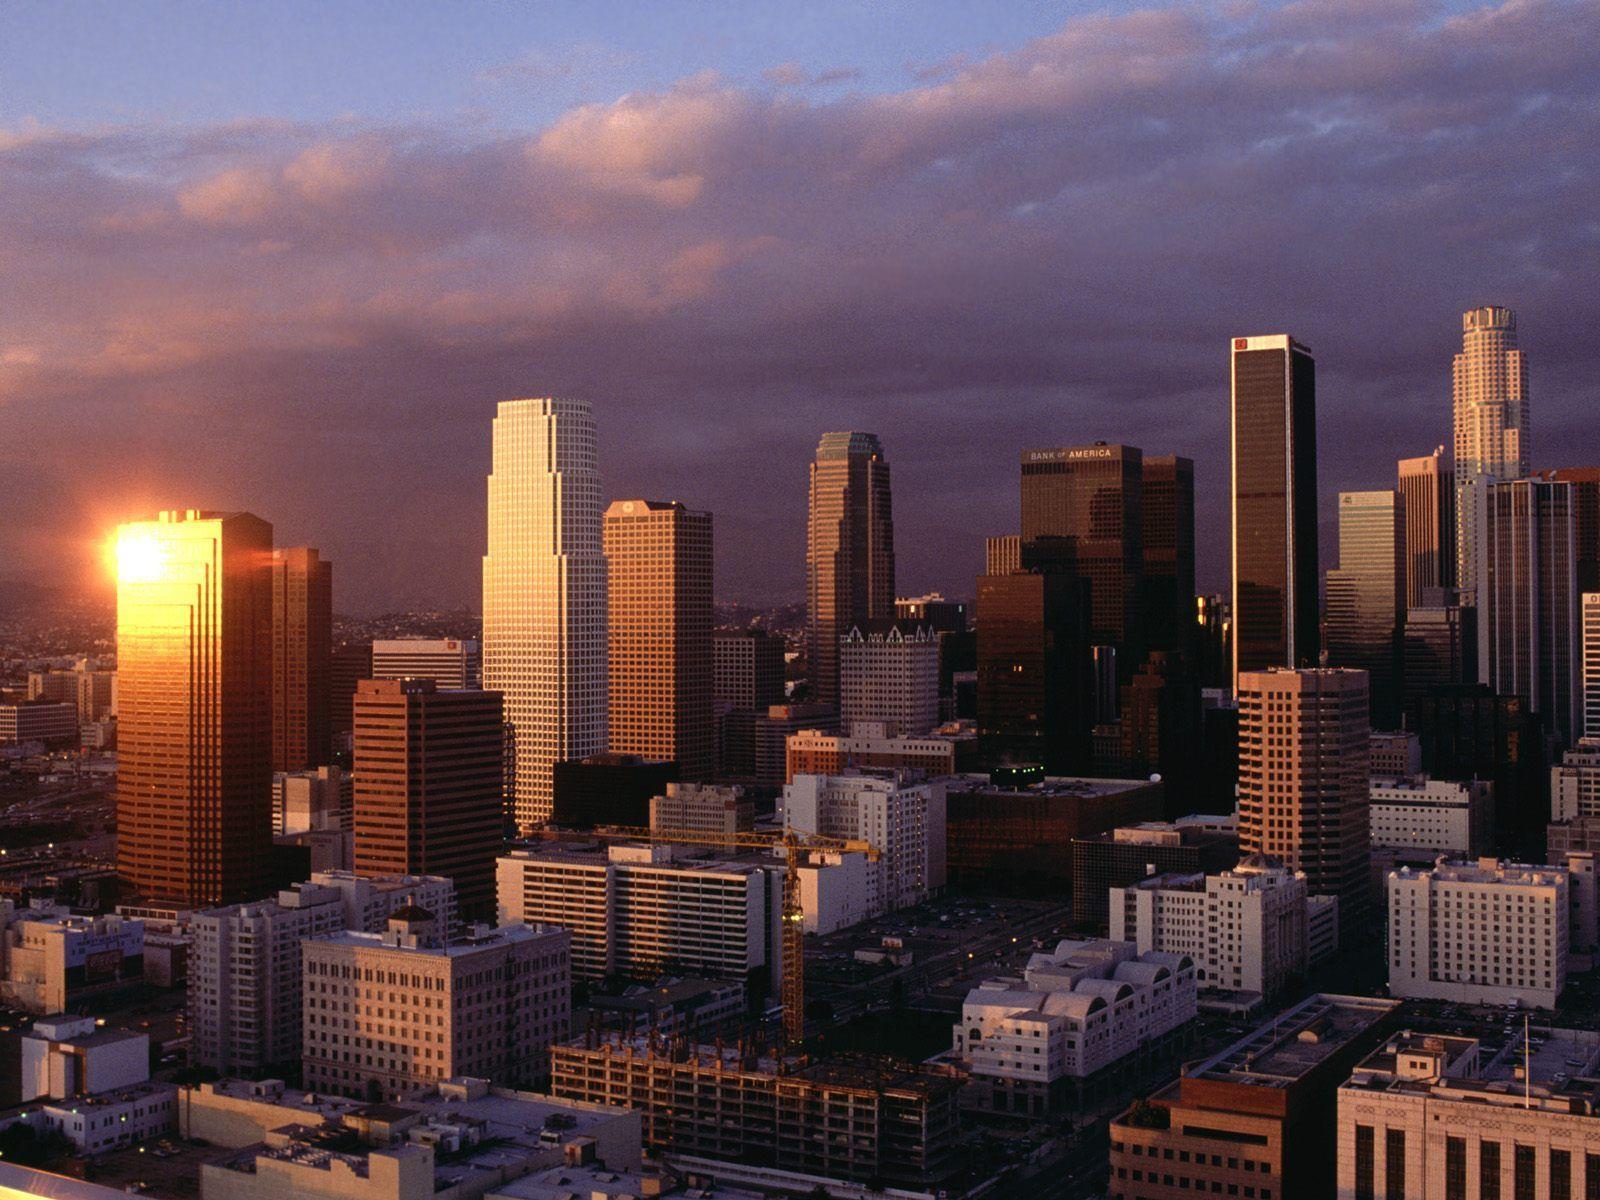 LA Wallpaper: Los Angeles Wallpaper Available For Download In HD